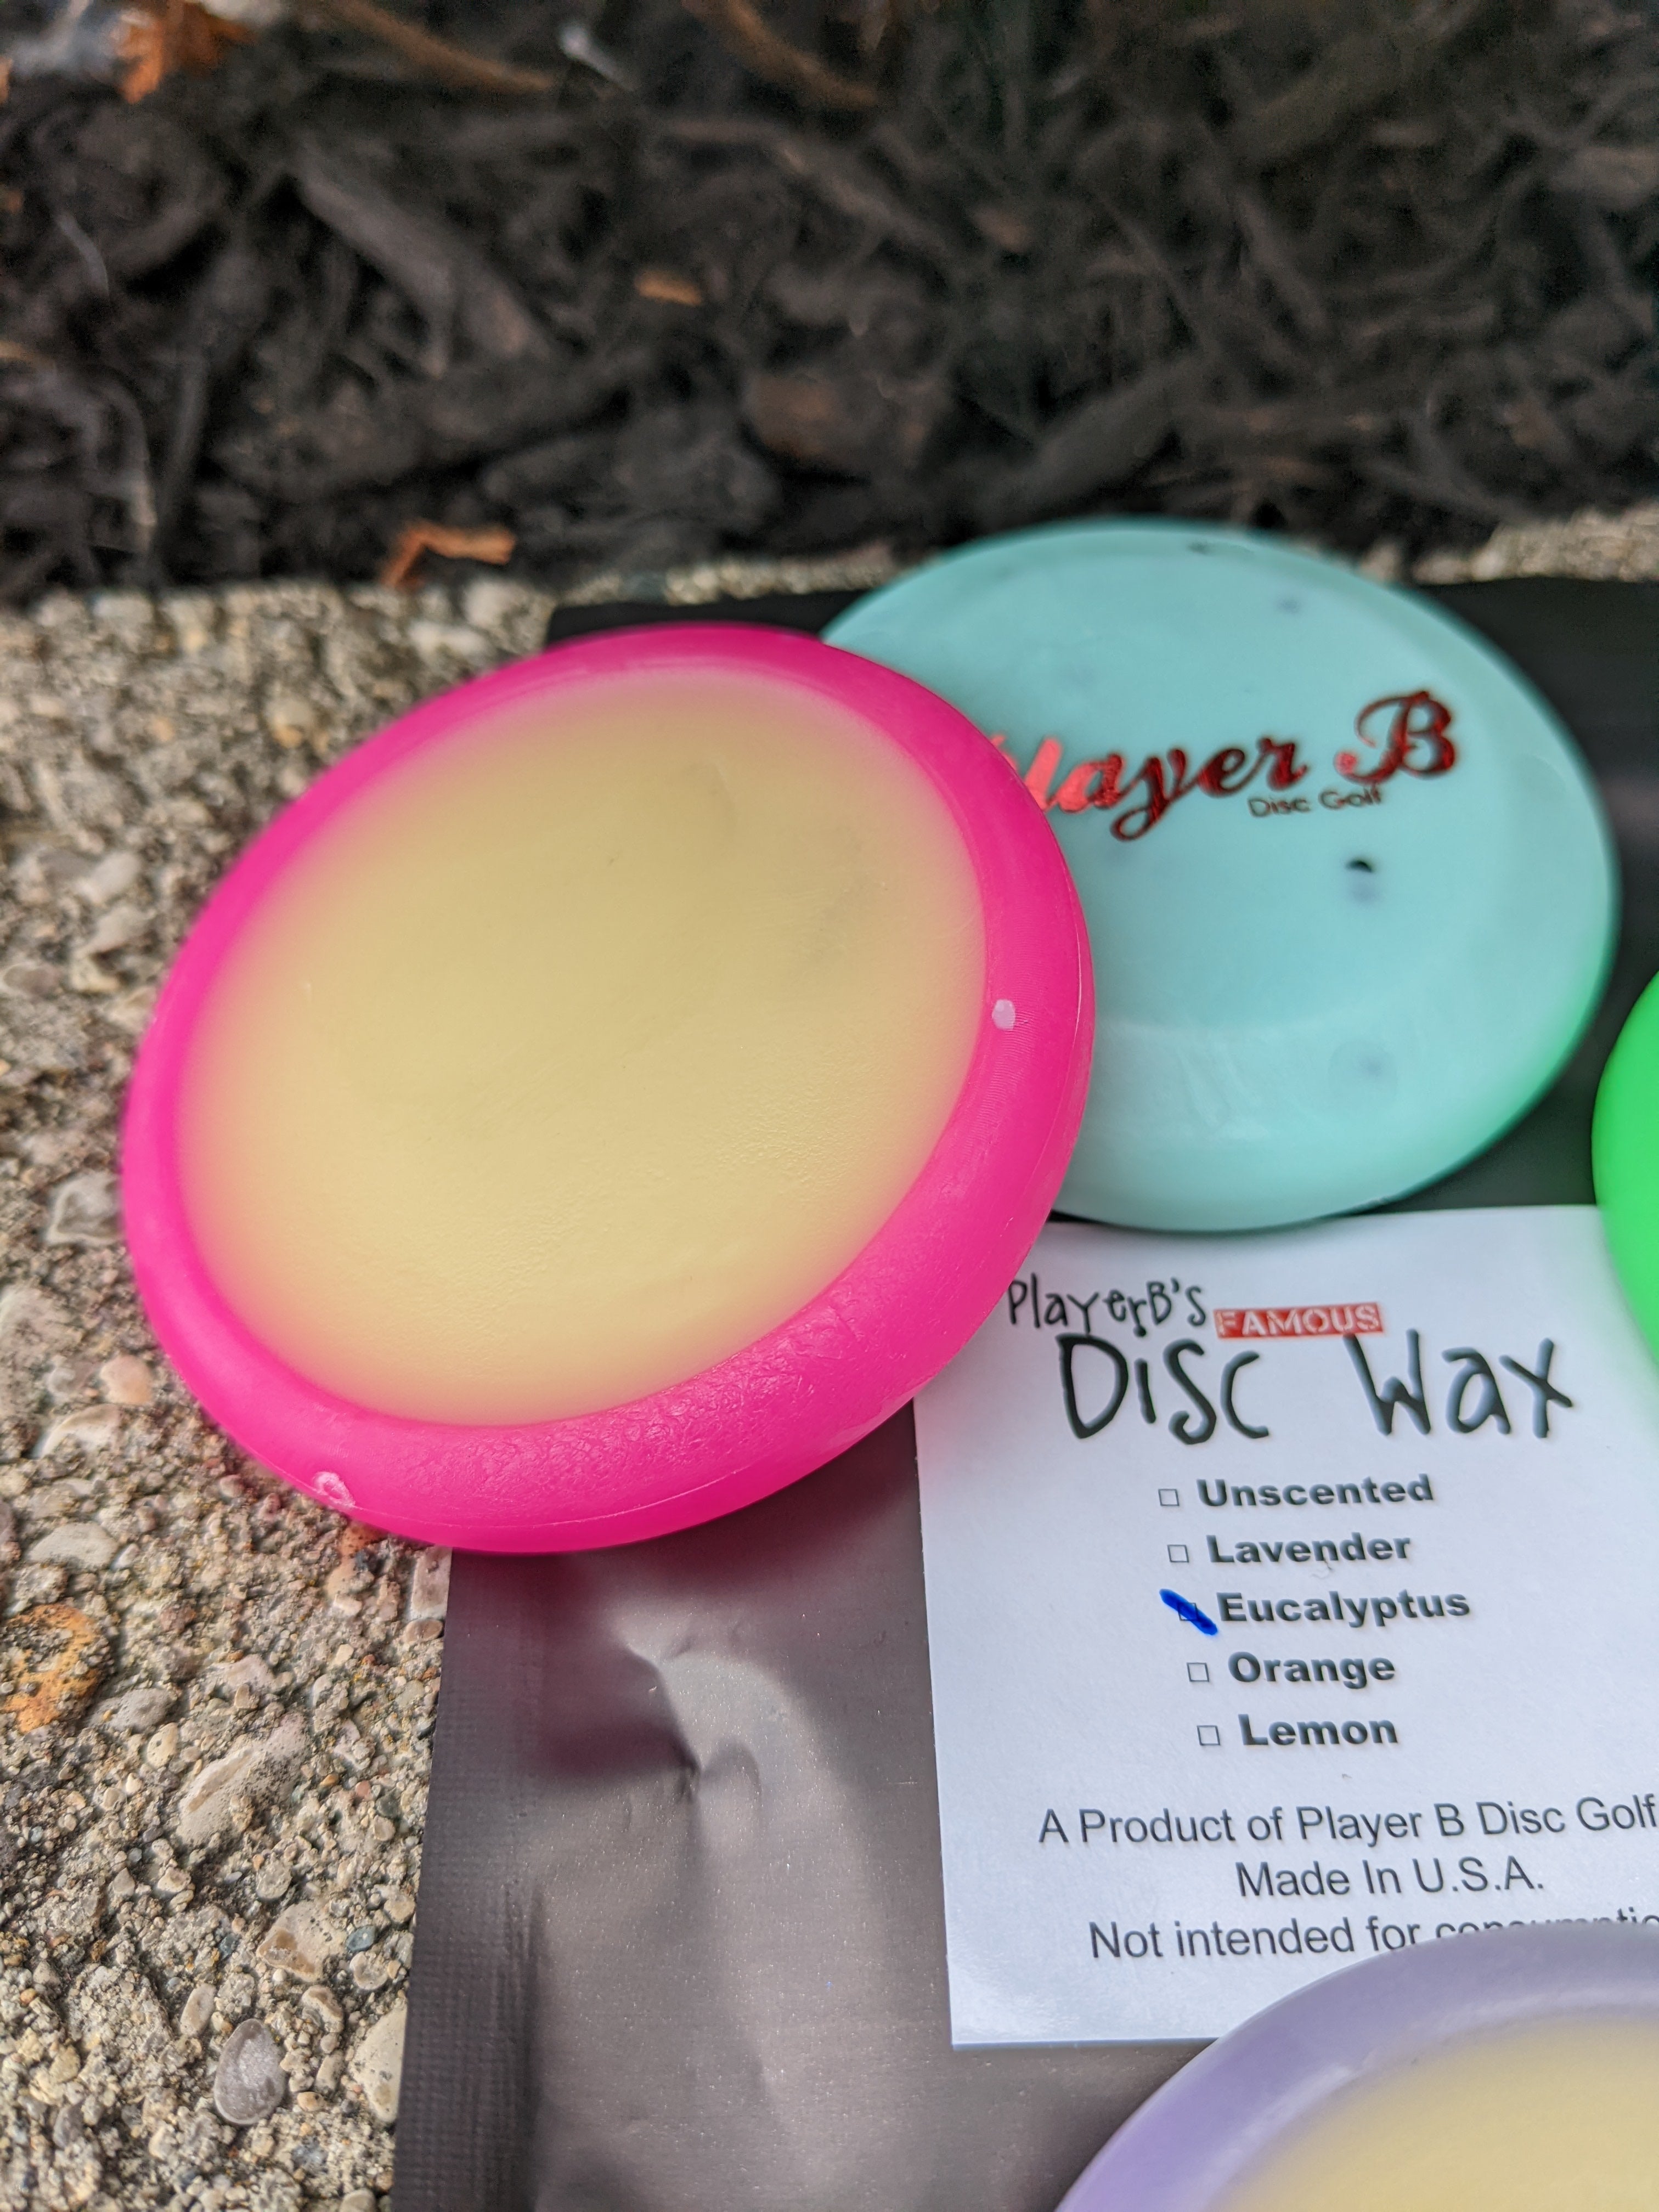 Player B's Famous Disc Wax